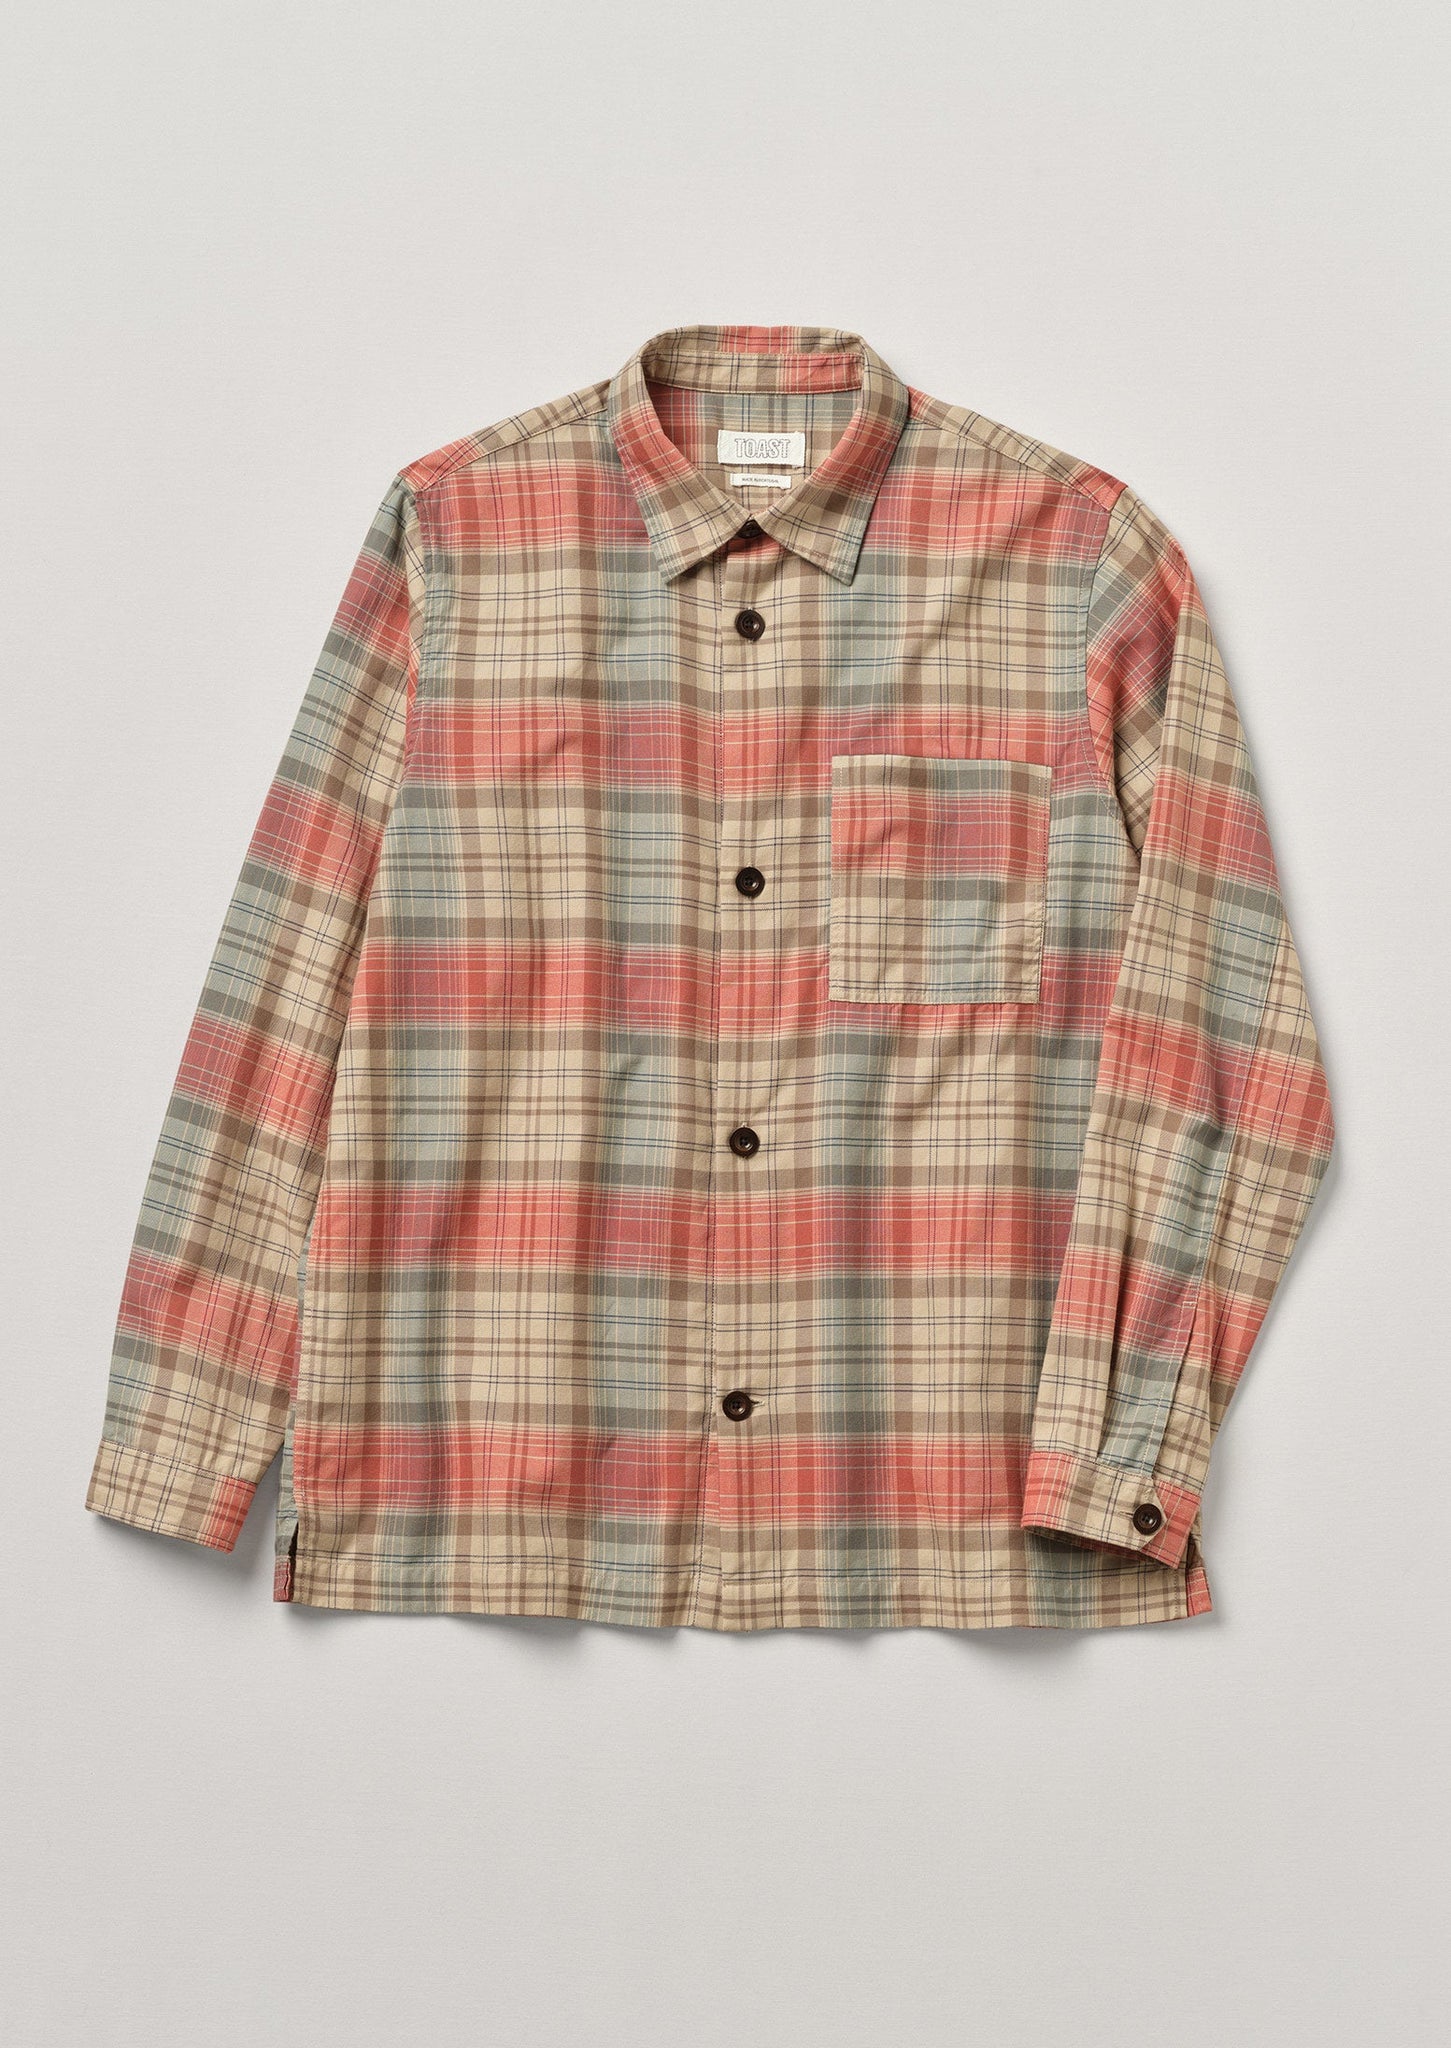 Point Collar Plaid Check Shirt | Teal/Red